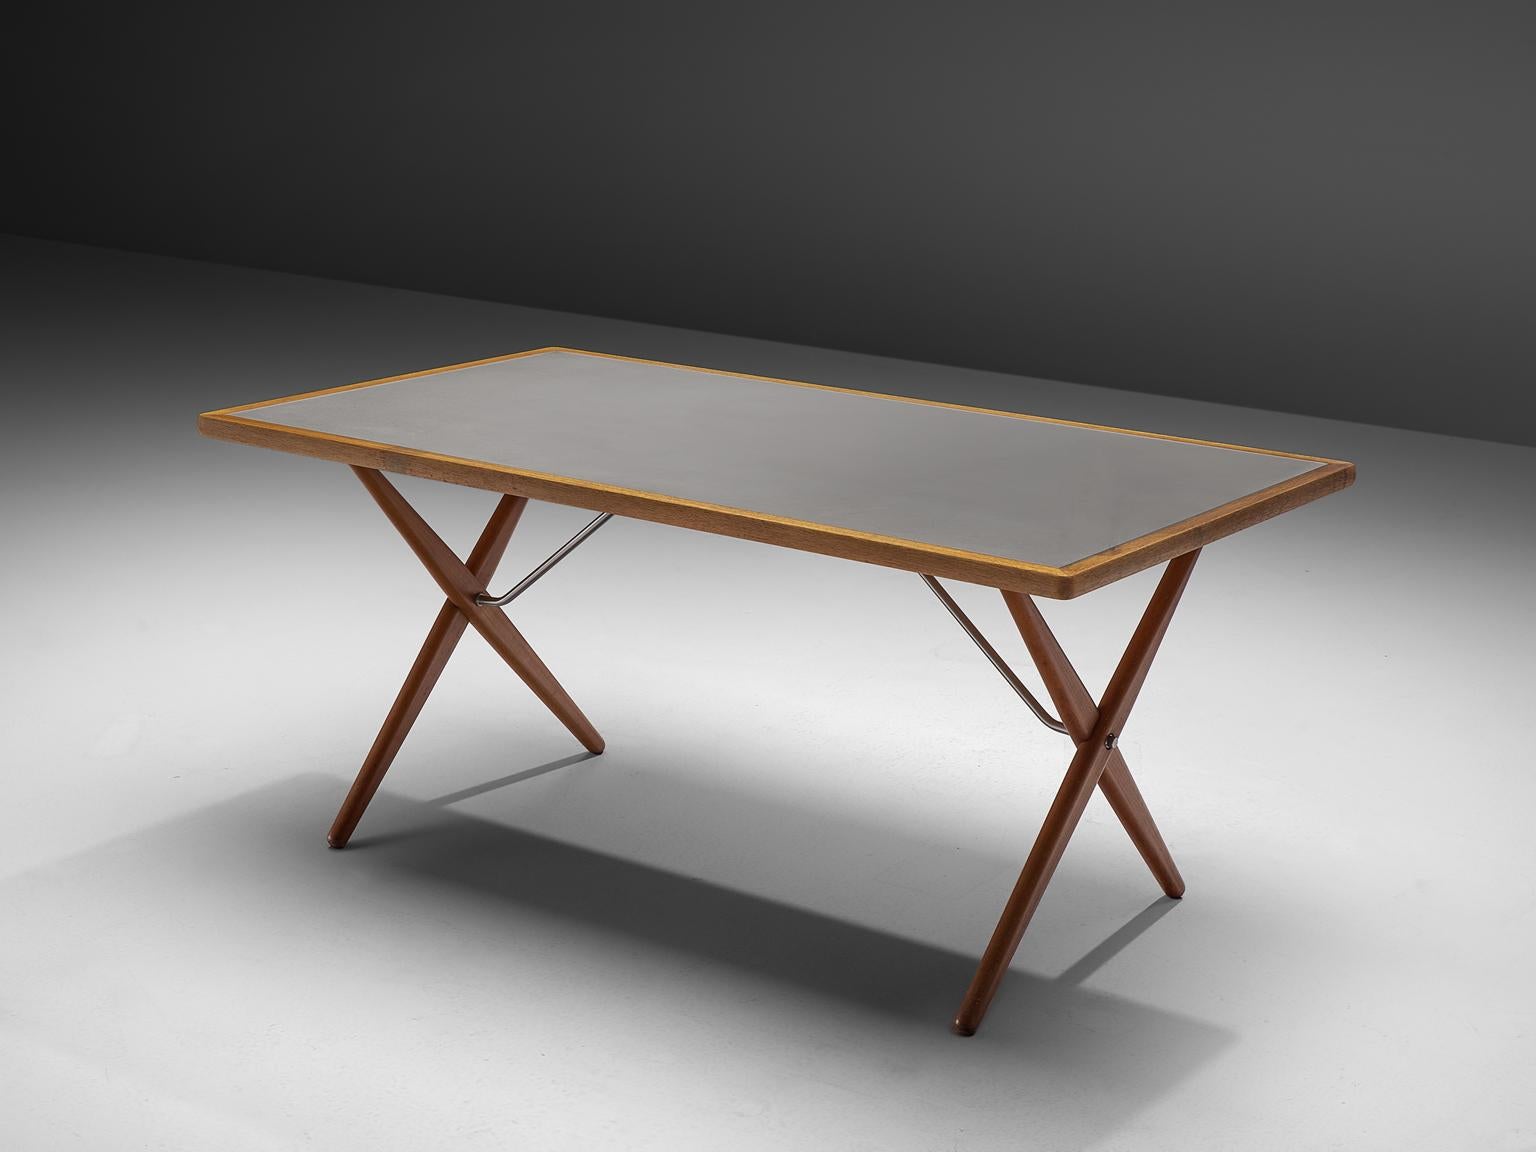 Hans J. Wegner for Andreas Tuck, table model AT-303, in teak, oak and metal, Denmark, 1955. 

Dining table with elegant X-shaped legs, by Danish Designer Hans Wegner. This table is considered as one of the best known designs from Wegner. From a